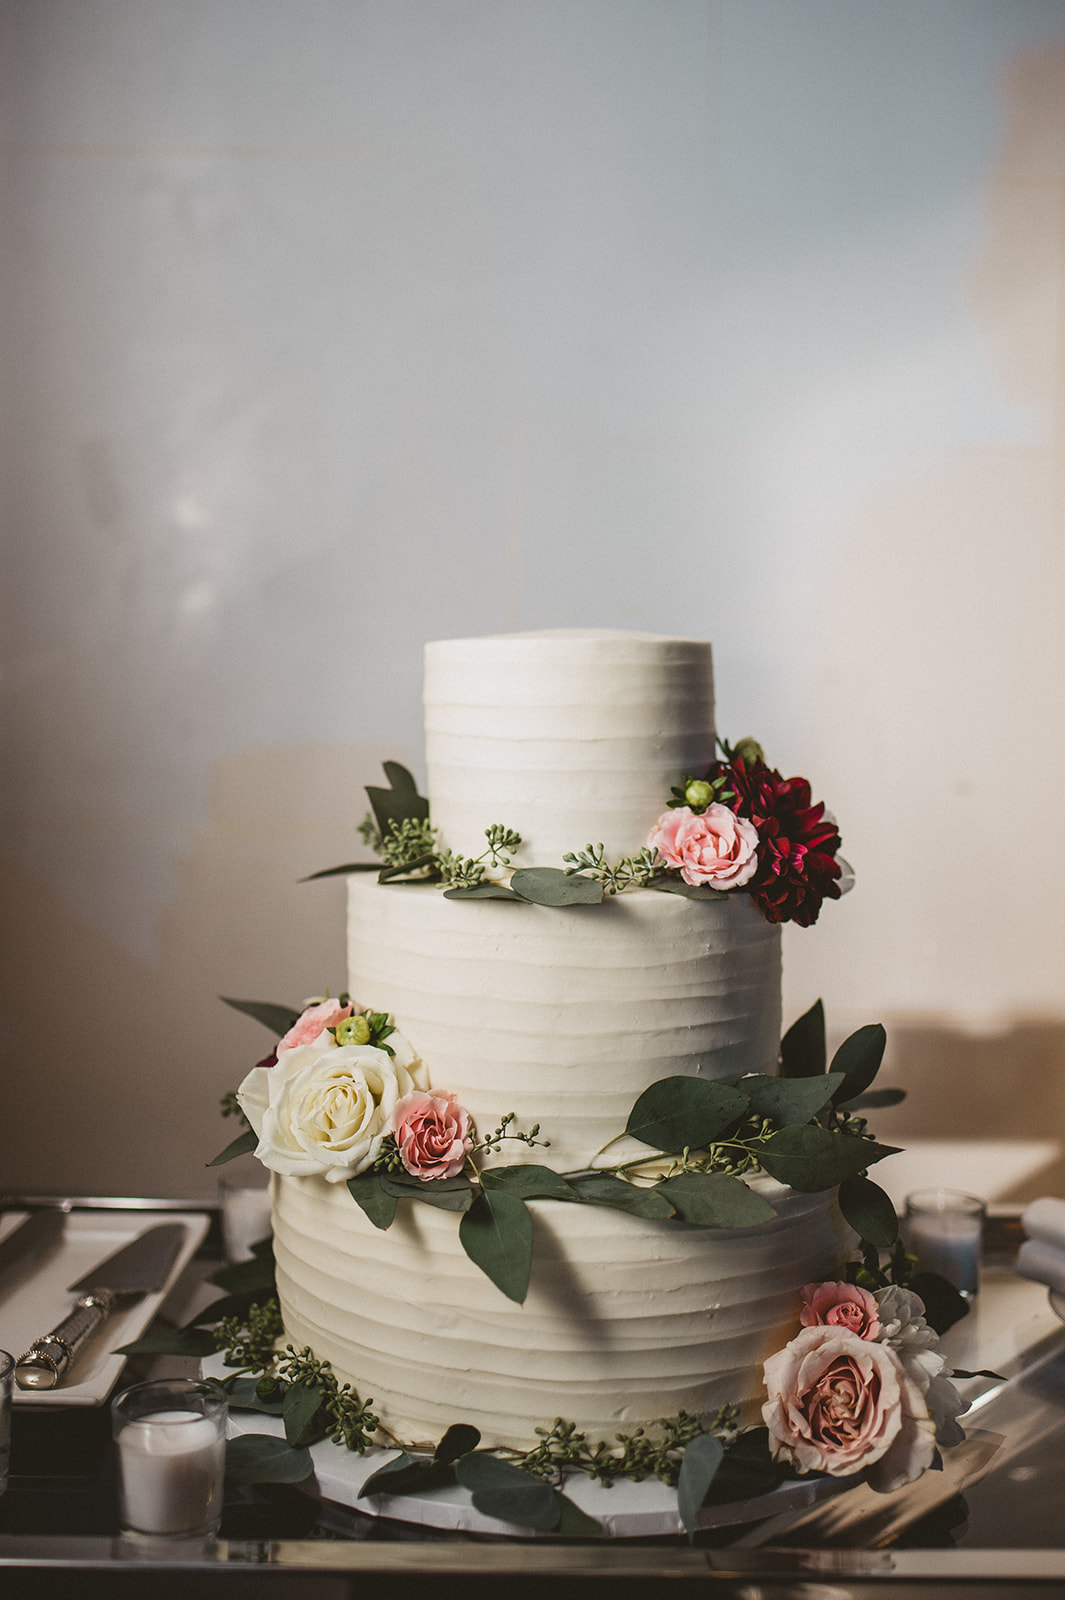 image of a wedding cake that's been decorated with buttercream and fresh flowers